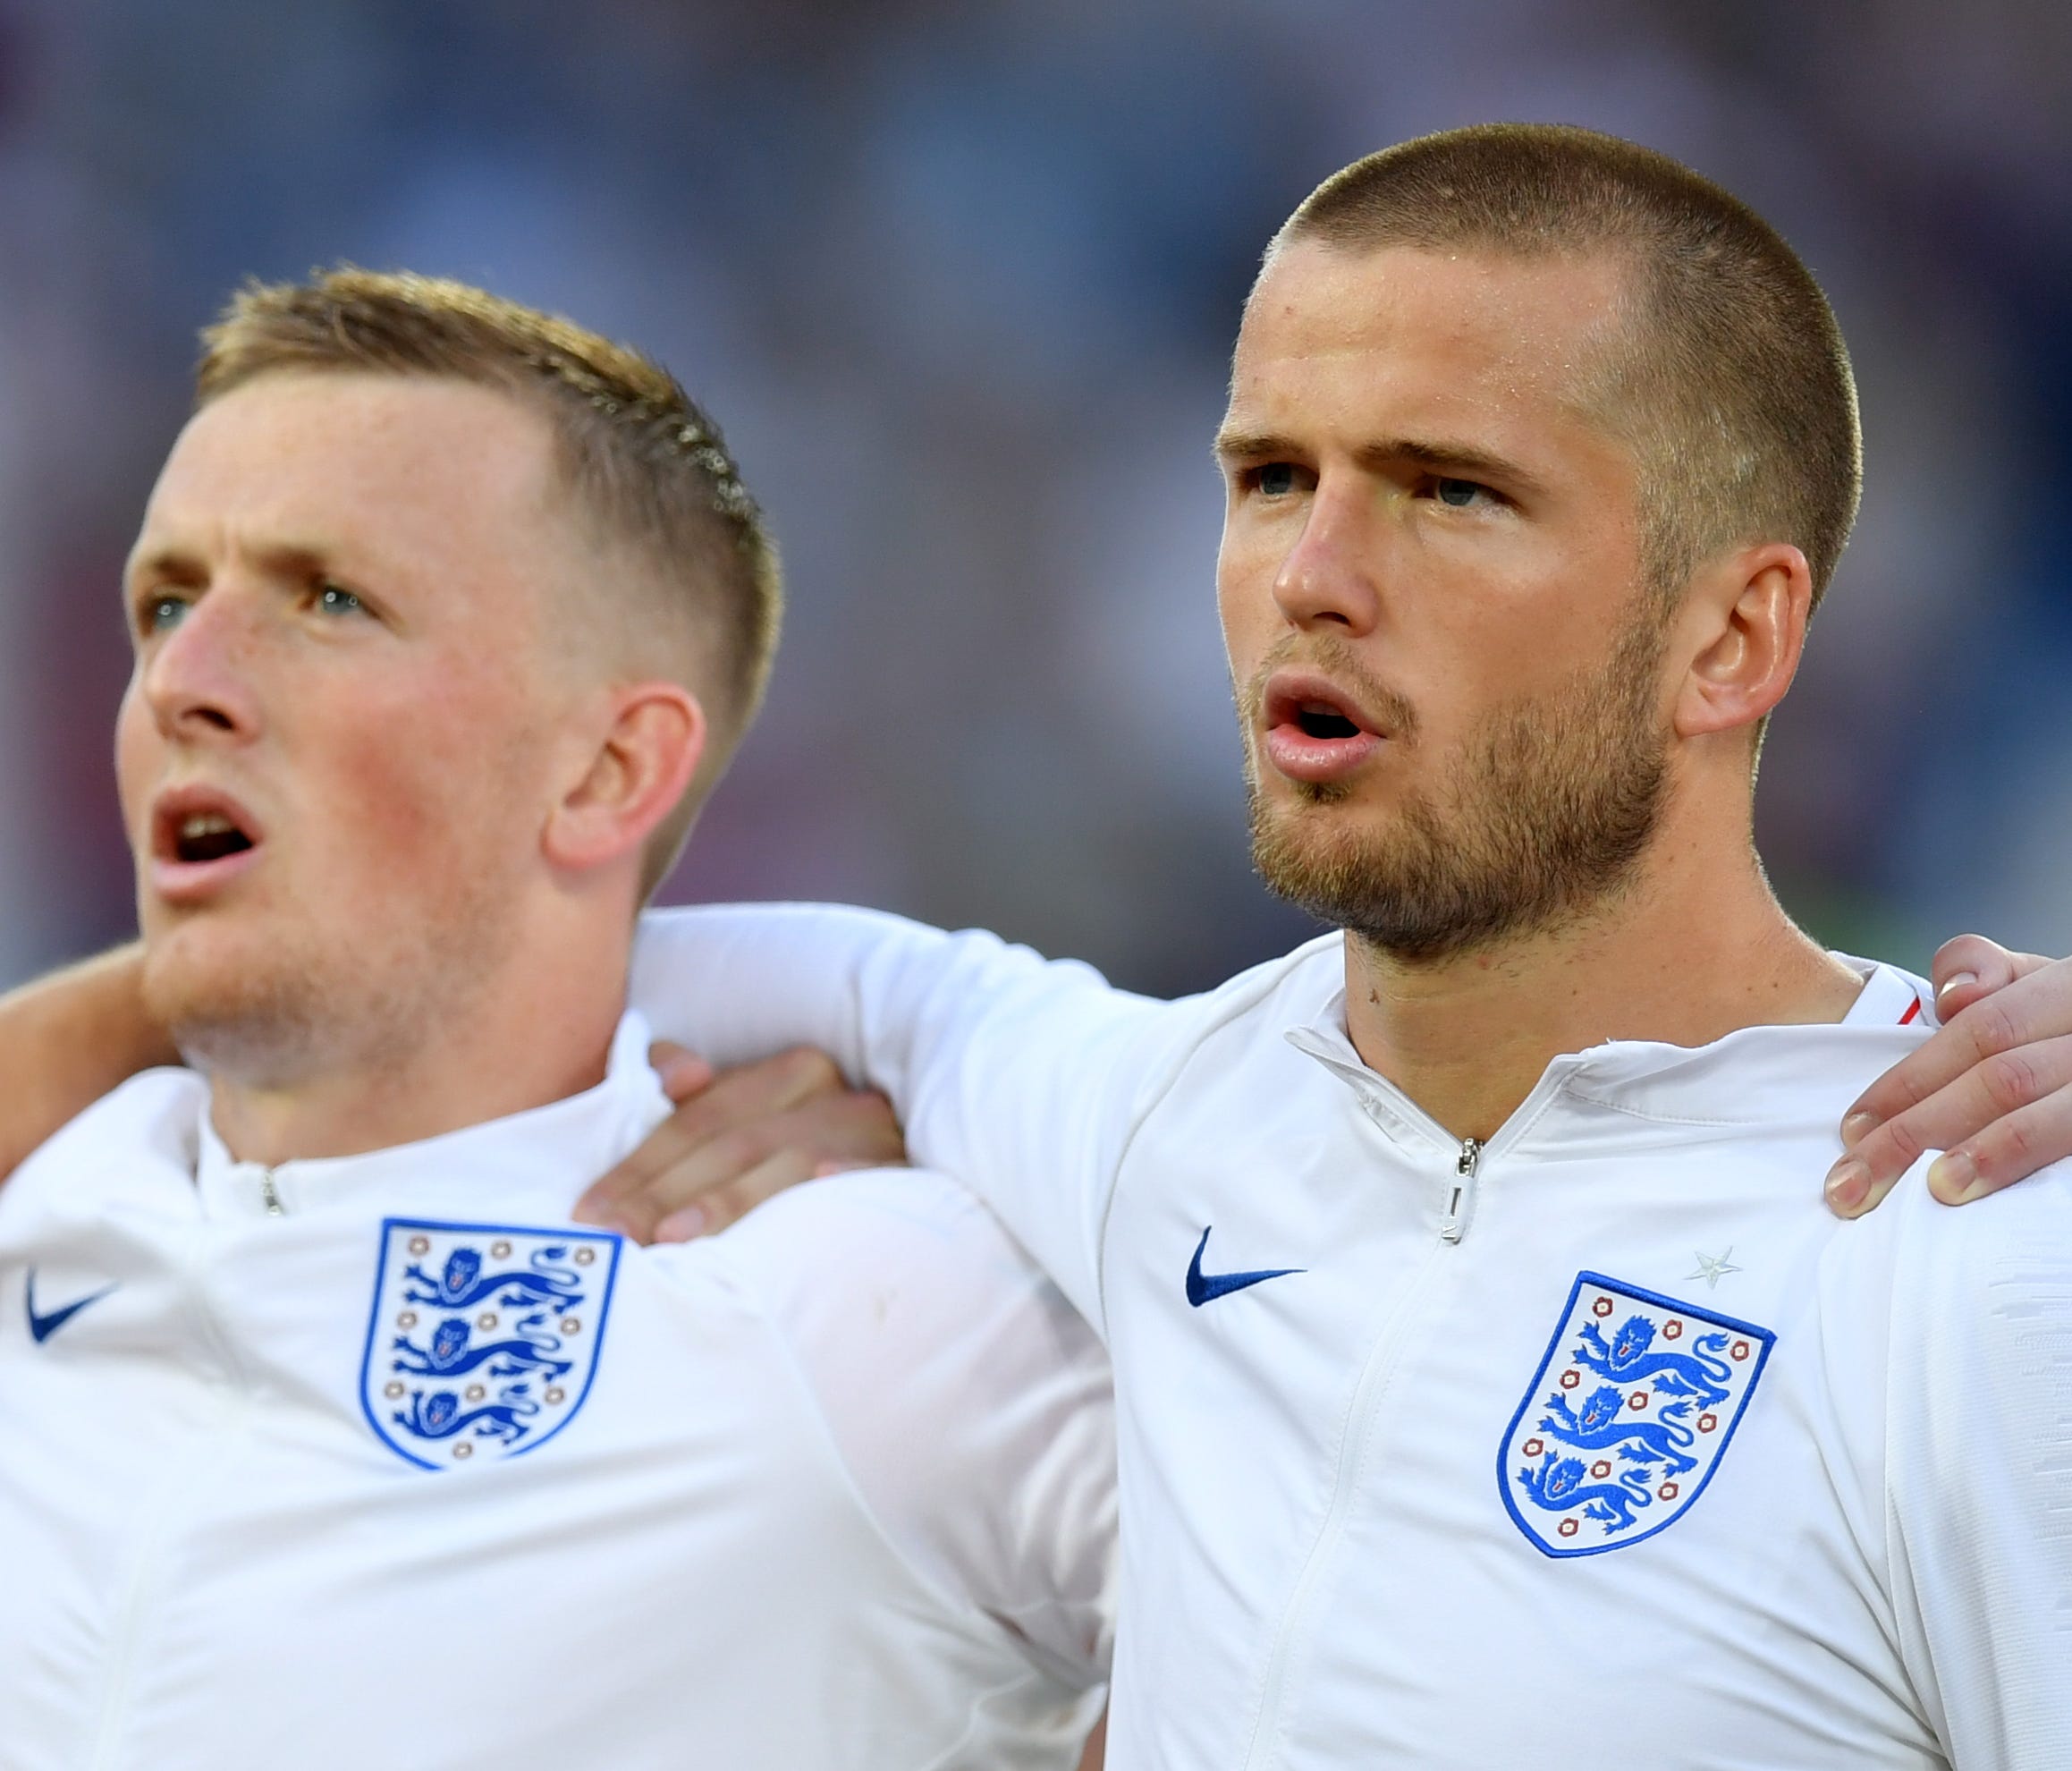 Jordan Pickford and Eric Dier during national anthems before the game against Belgium.